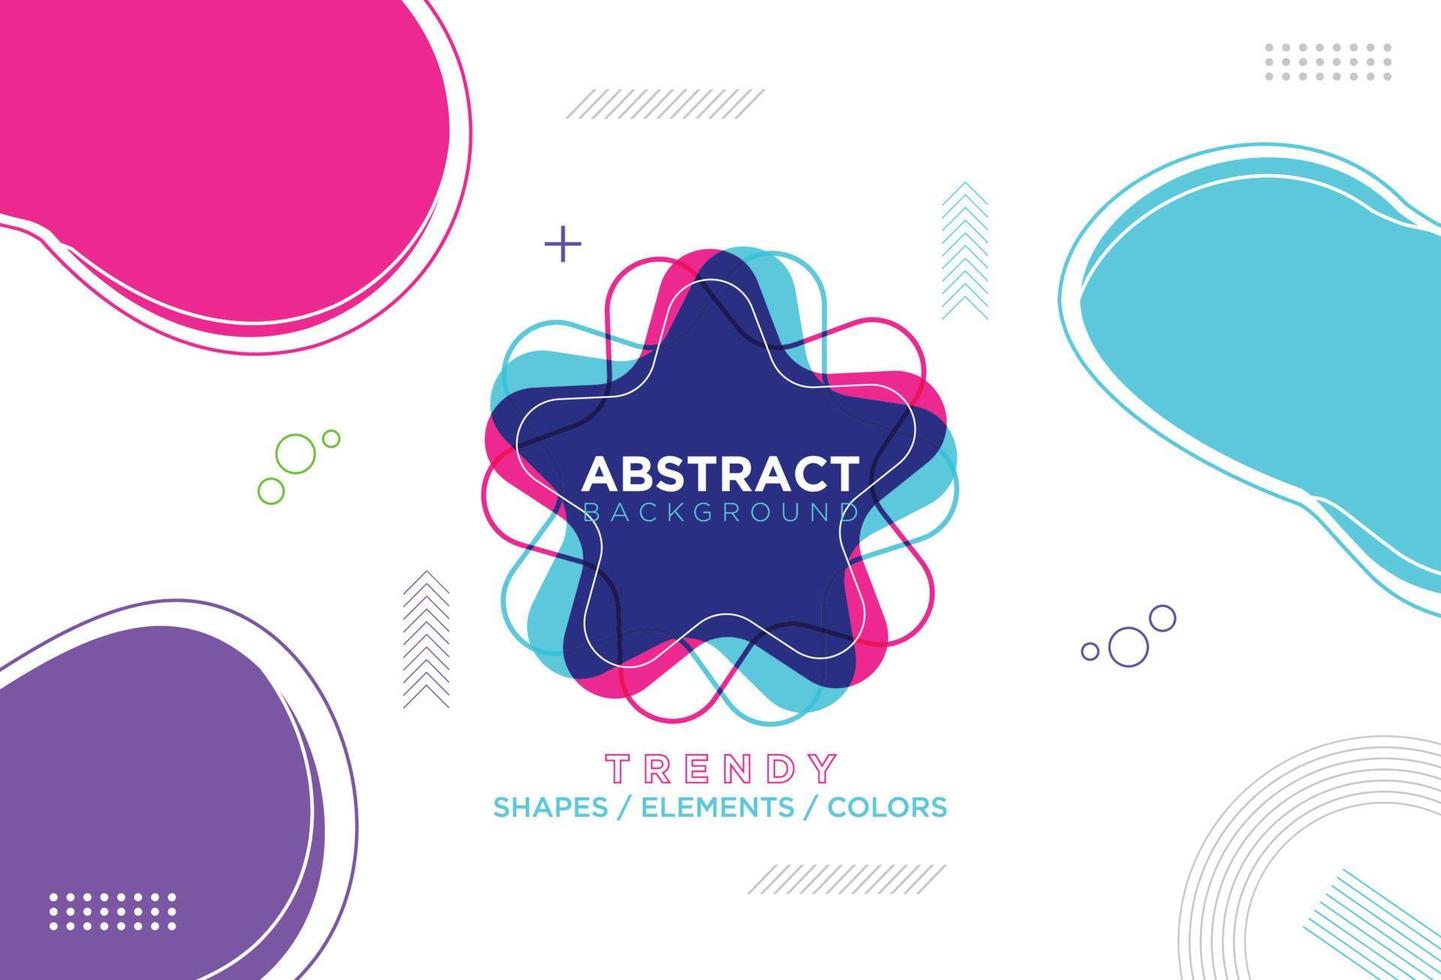 Geometric and Liquid Shapes Abstract Background Design With Modern Looks vector